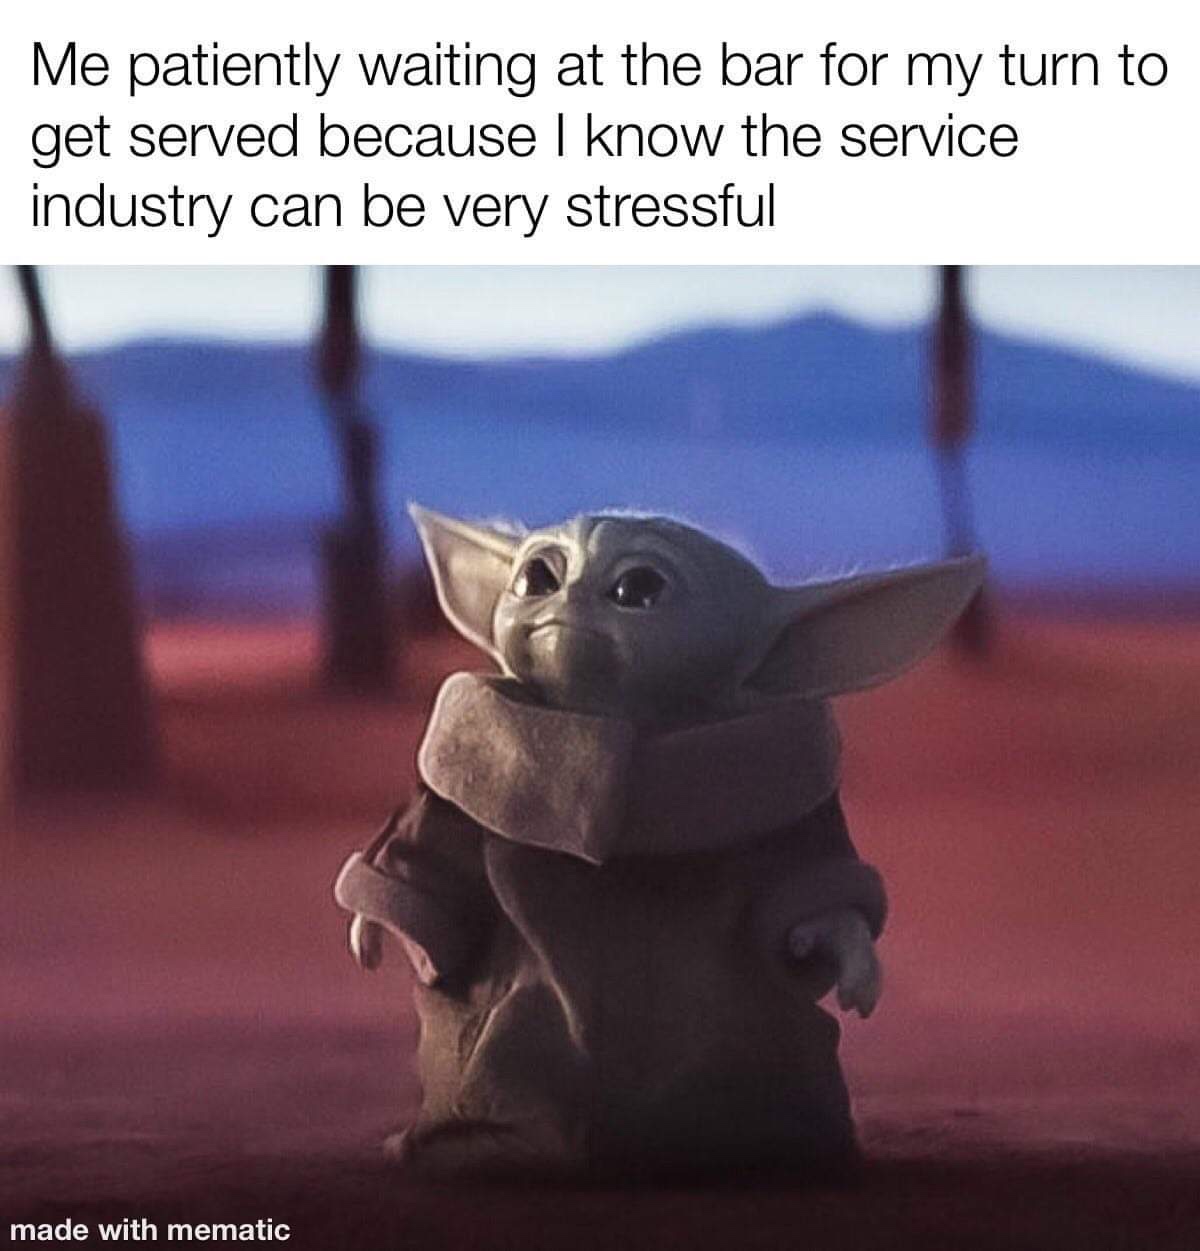 wholesome meme - baby yoda dank memes - Me patiently waiting at the bar for my turn to get served because I know the service industry can be very stressful made with mematic